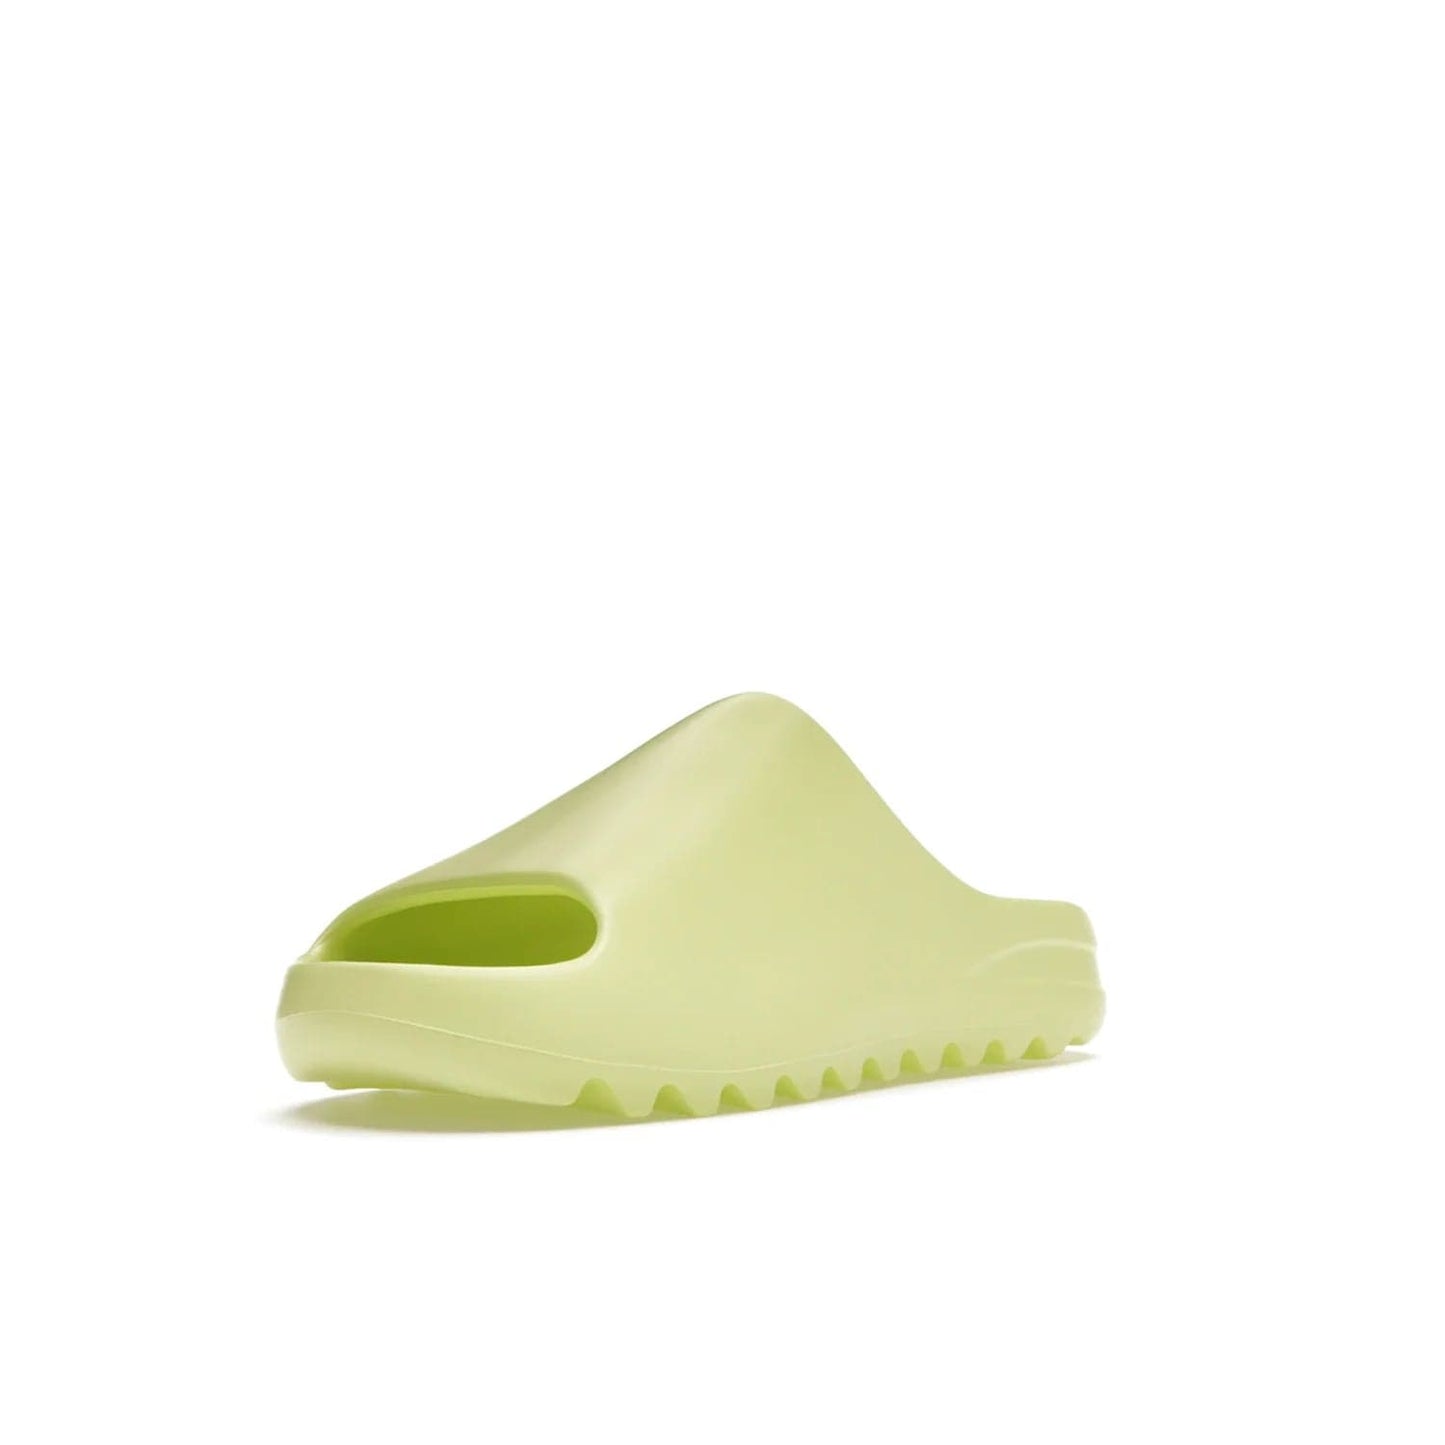 adidas Yeezy Slide Glow Green - Image 14 - Only at www.BallersClubKickz.com - Experience an unexpected summer style with the adidas Yeezy Slide Glow Green. This limited edition slide sandal provides a lightweight and durable construction and a bold Glow Green hue. Strategic grooves enhance traction and provide all-day comfort. Make a statement with the adidas Yeezy Slide Glow Green.